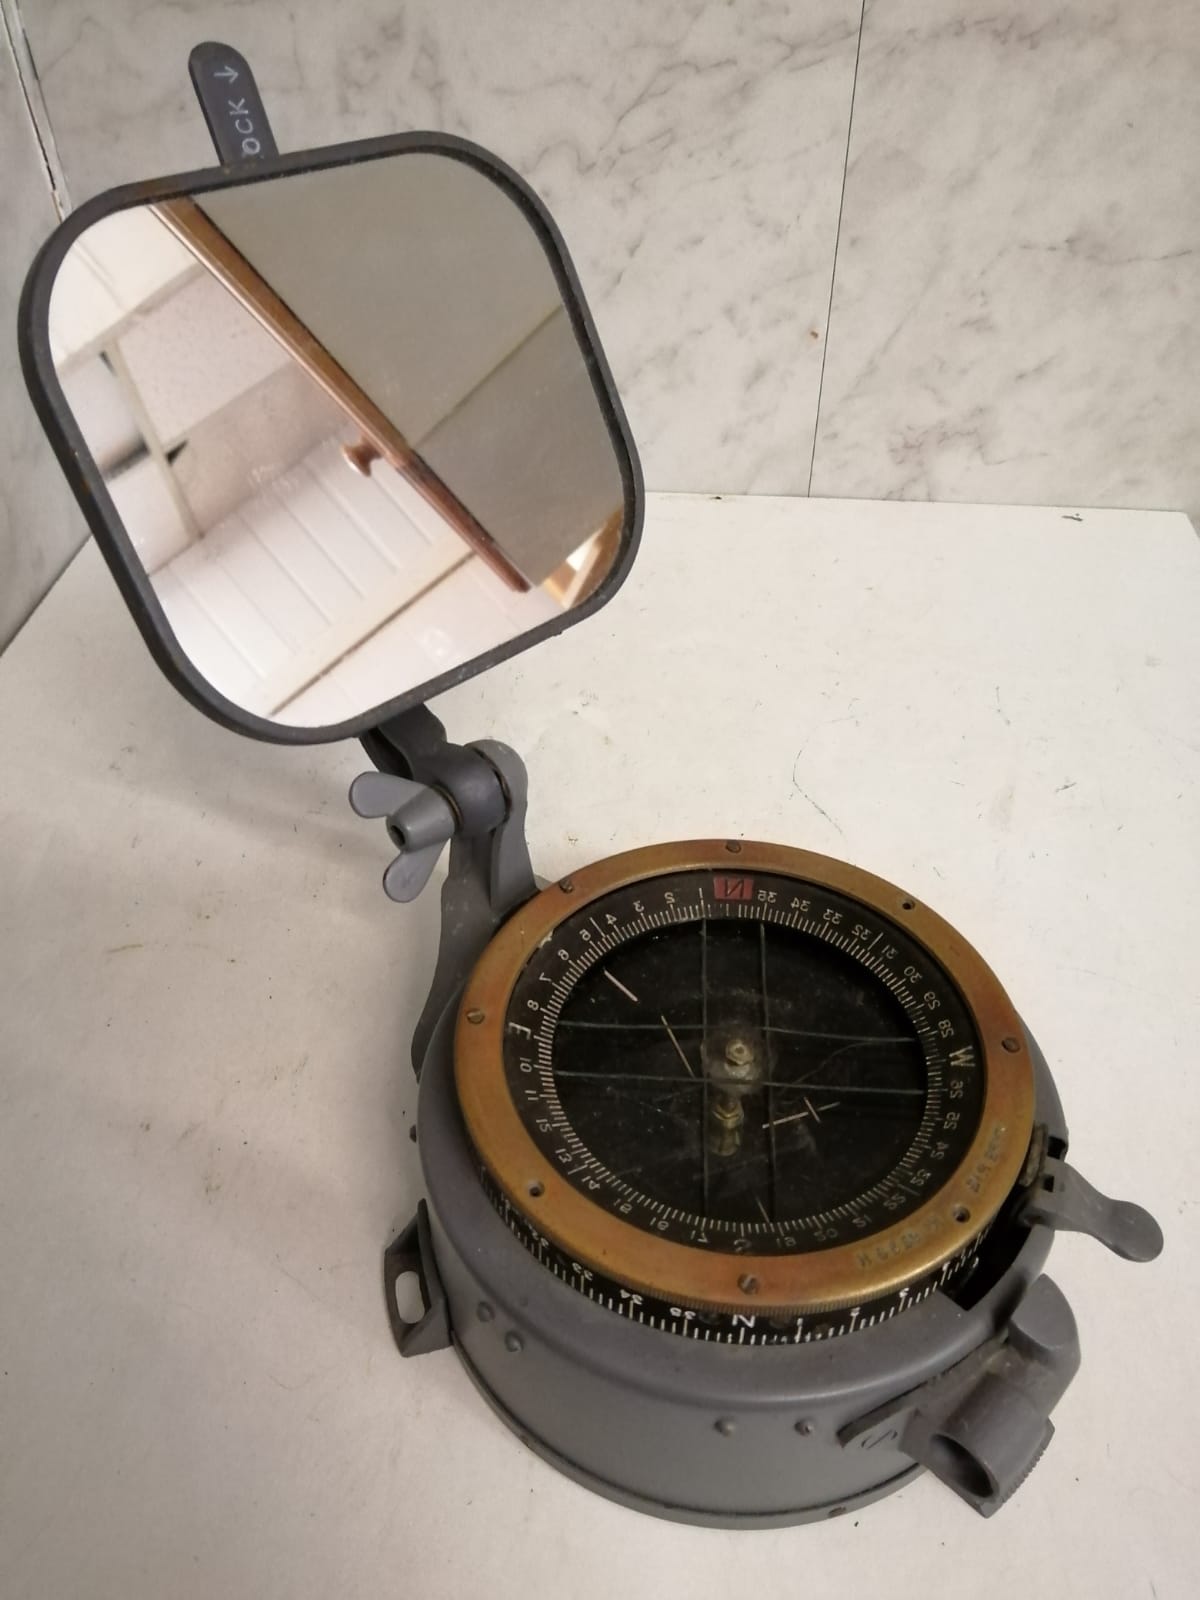 Aircraft compass and mirror. Vintage